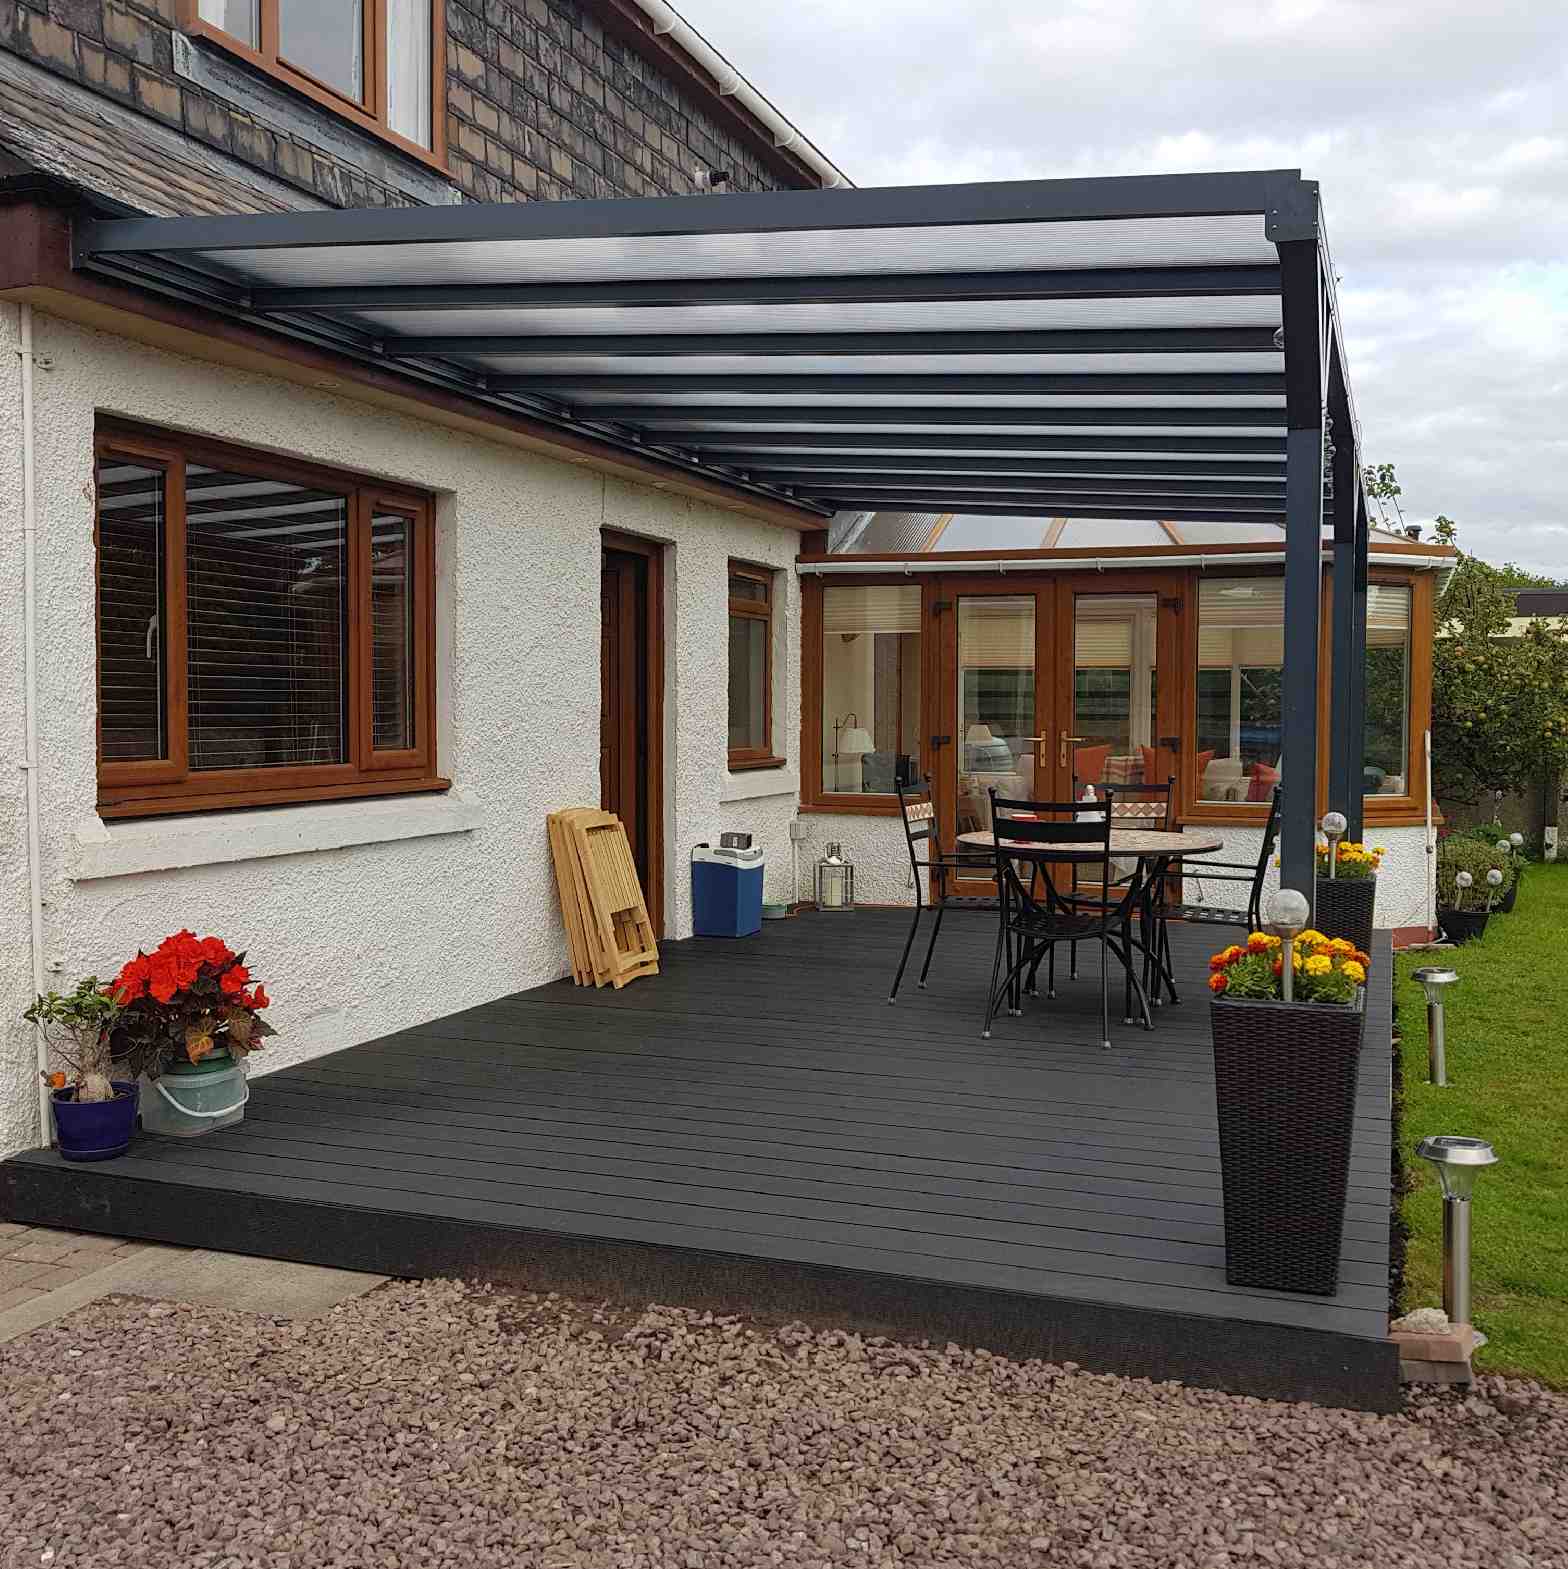 Buy Omega Verandah, Anthracite Grey, 16mm Polycarbonate Glazing - 9.2m (W) x 4.0m (P), (5) Supporting Posts online today